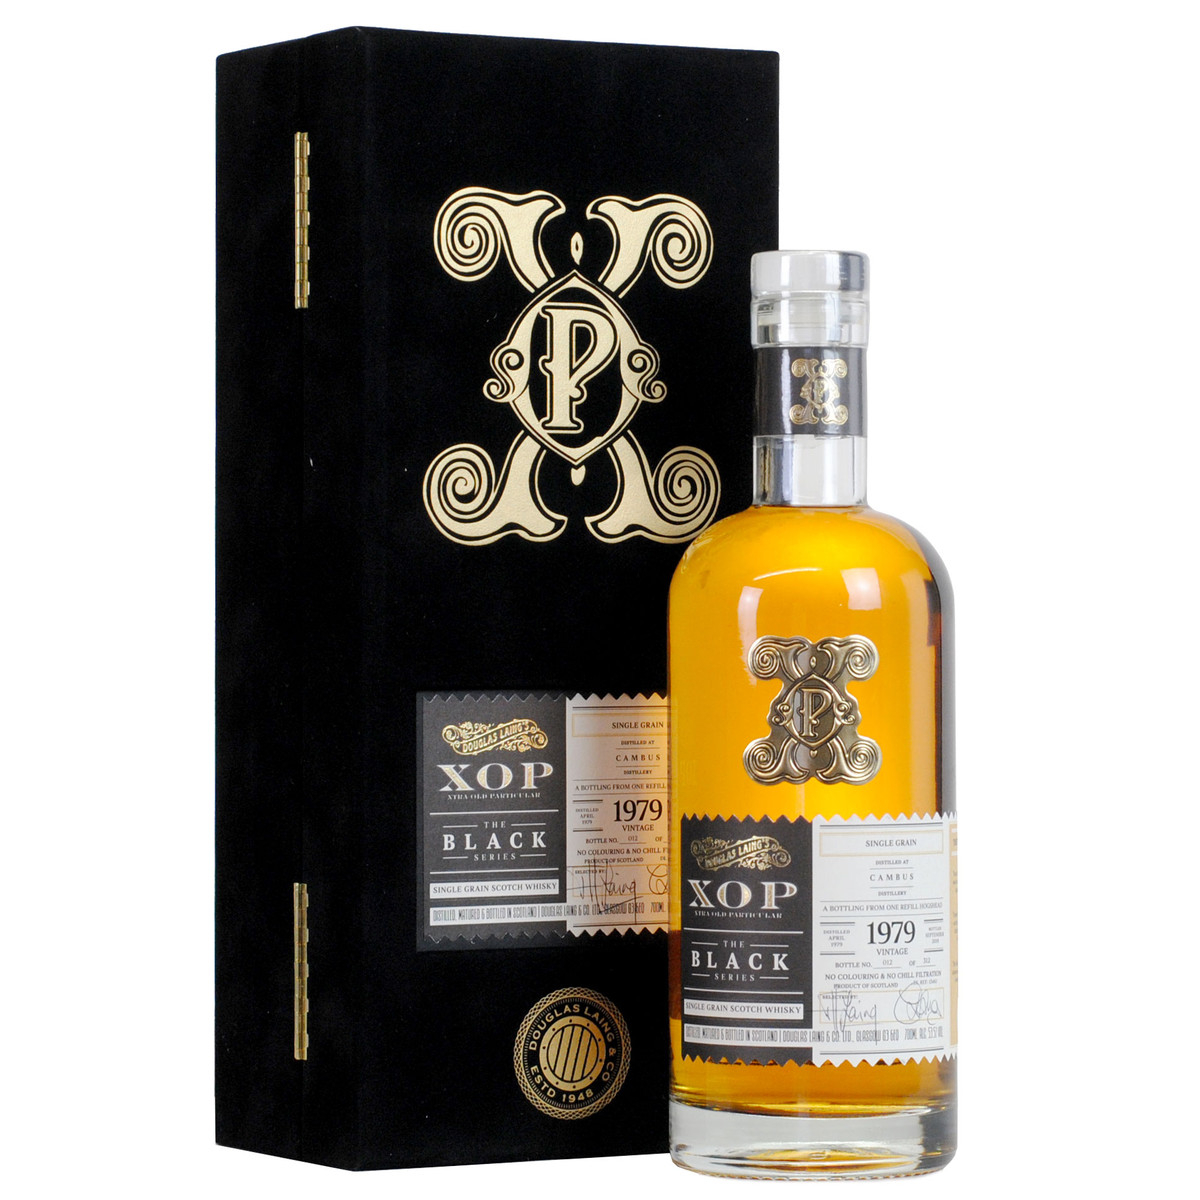 Xtra Old Particular Black Cambus 40 Years Single Cask Single Grain Whisky – Lowland Scotland